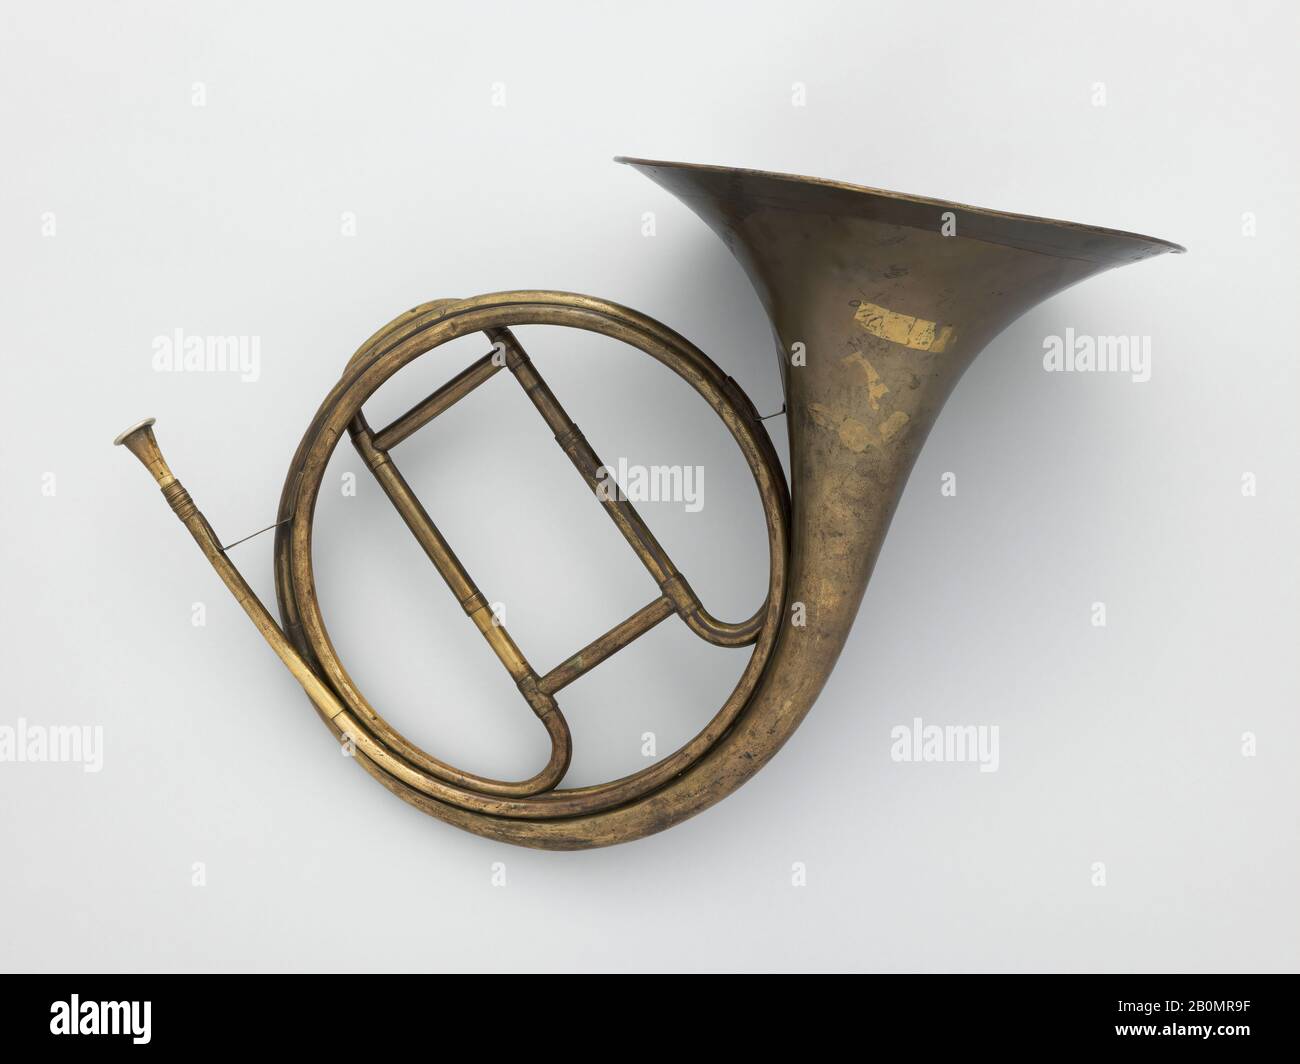 Unknown, Orchestral Horn, German, Unknown, for sale by Carl Gottfried Glier and Sons, ca. 1830, Markneukirchen or vicinity, Germany, German, brass, 17 × 22 1/2 × 11 1/8 in. (43.2 × 57.2 × 28.3 cm), Aerophone-Lip Vibrated-horn Stock Photo